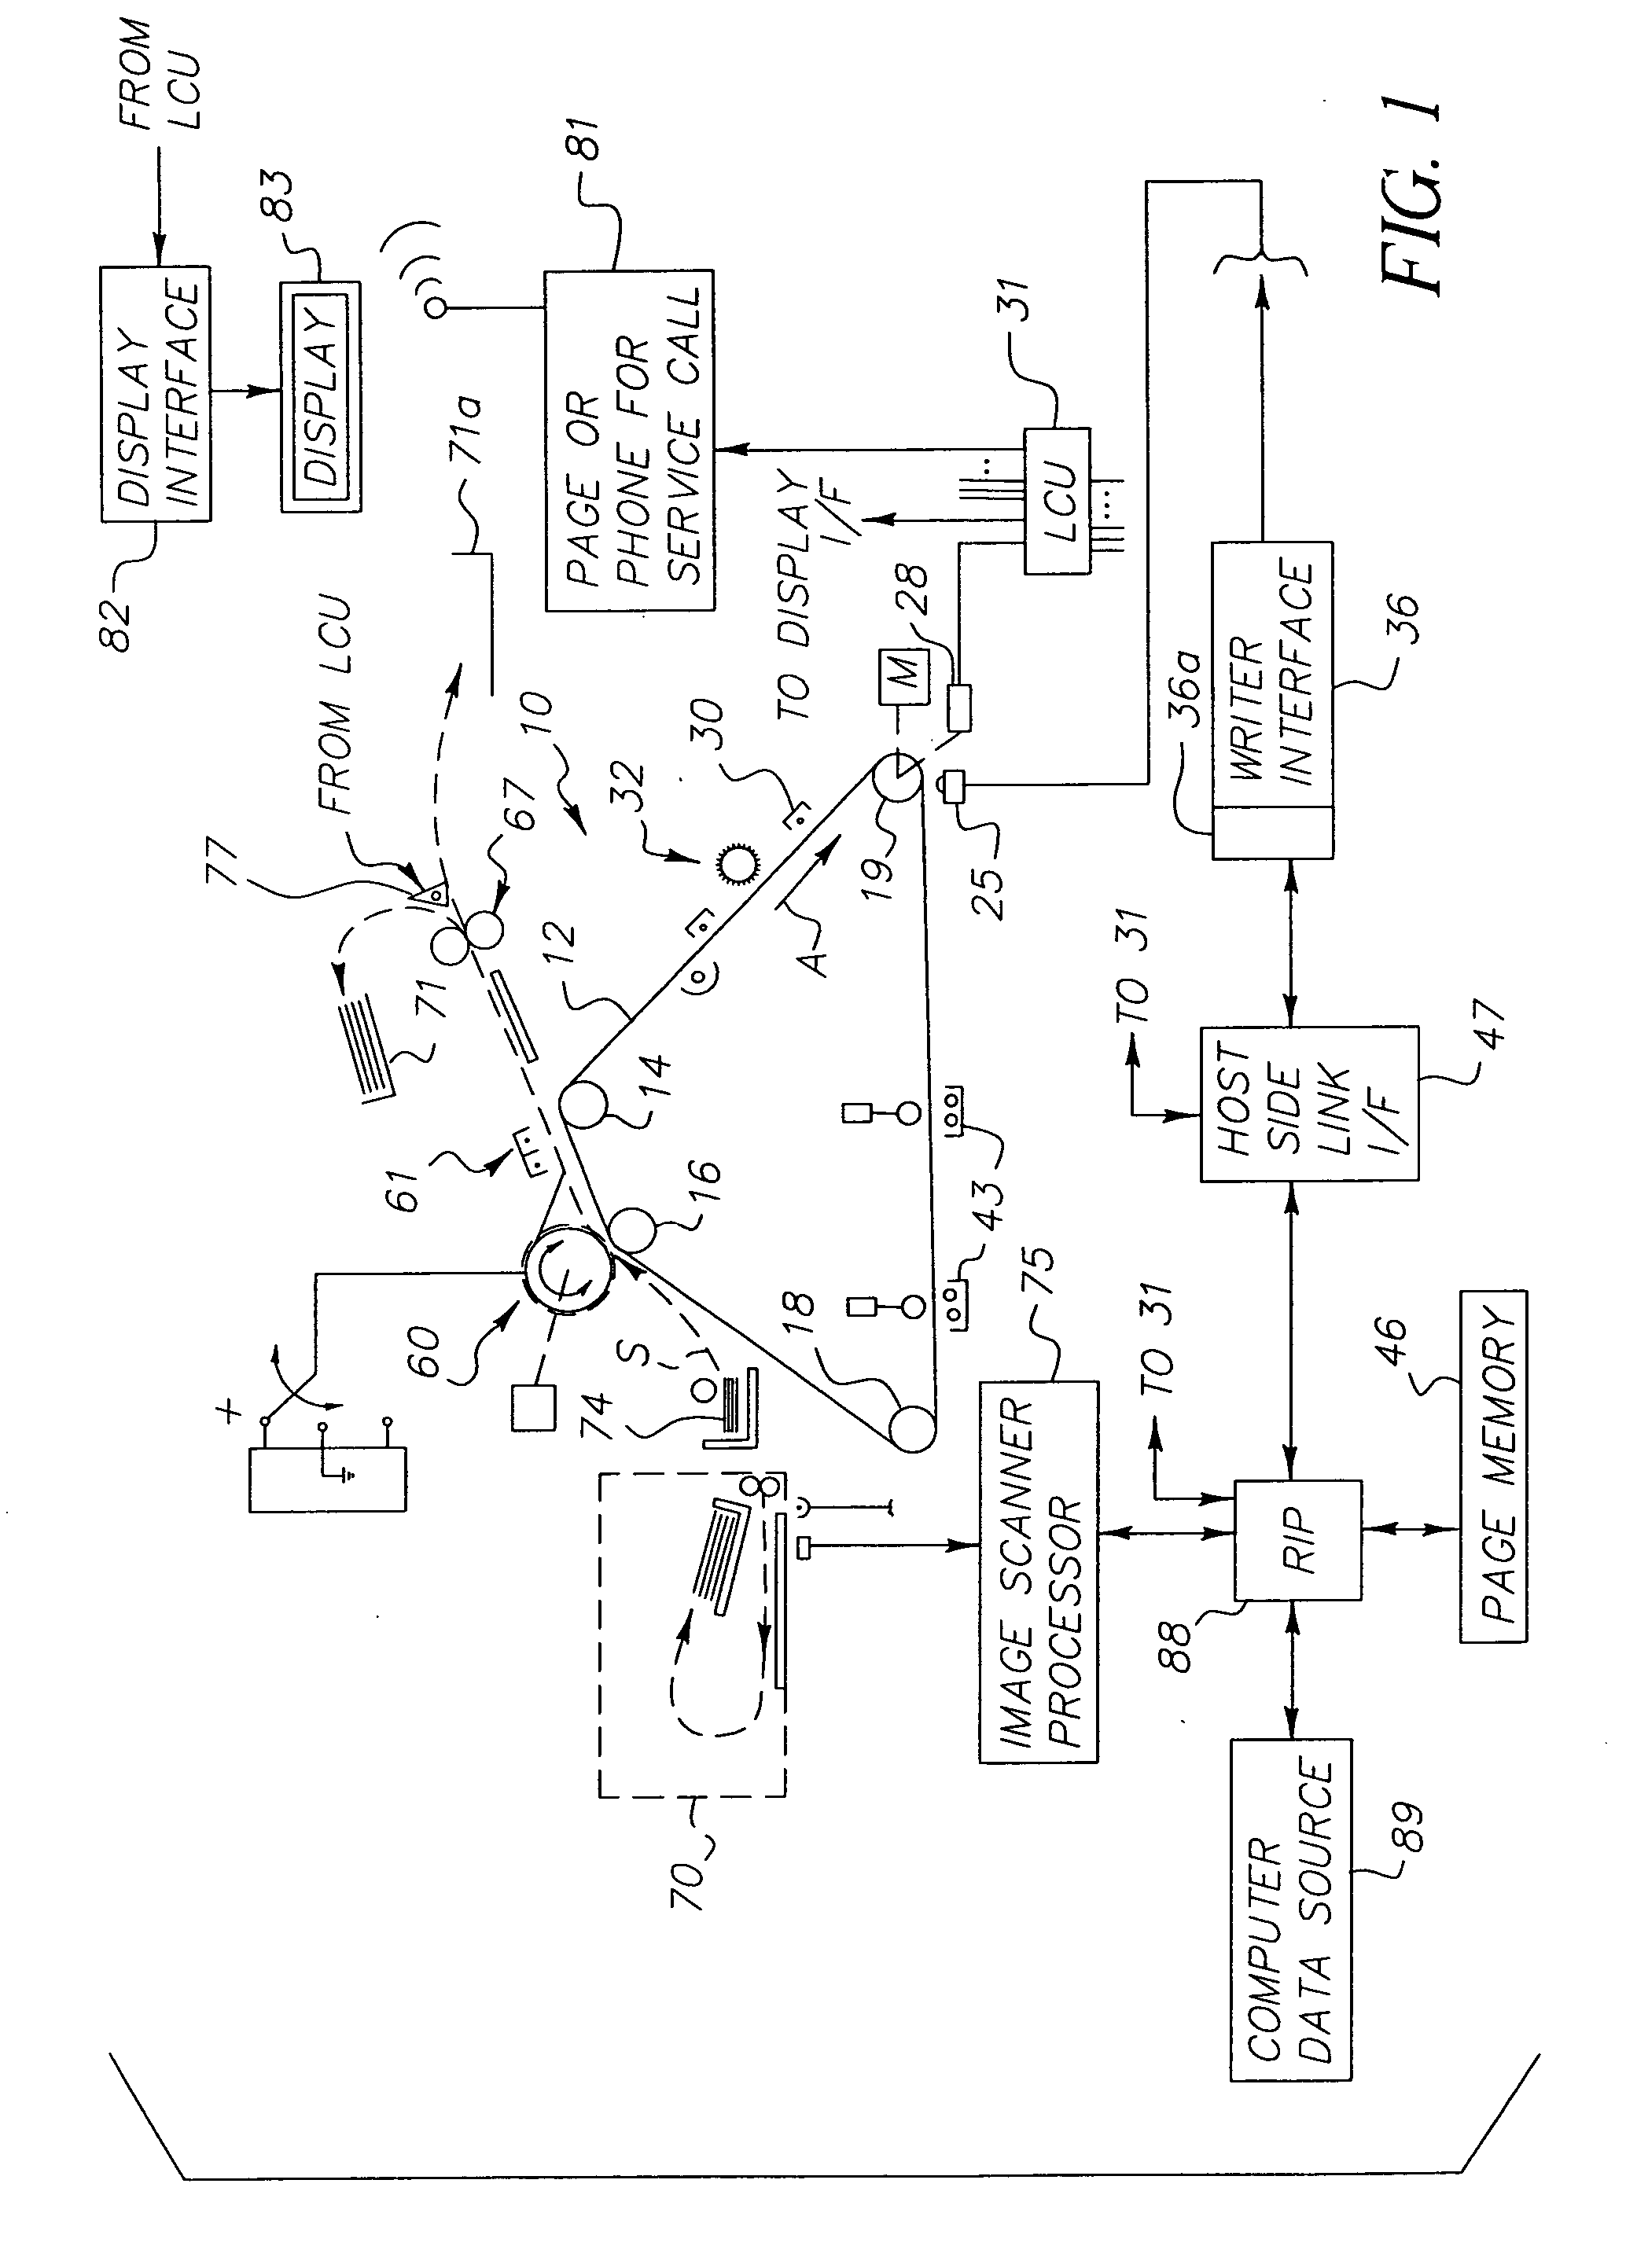 Apparatus and method for printing validated image data in a noisy environment